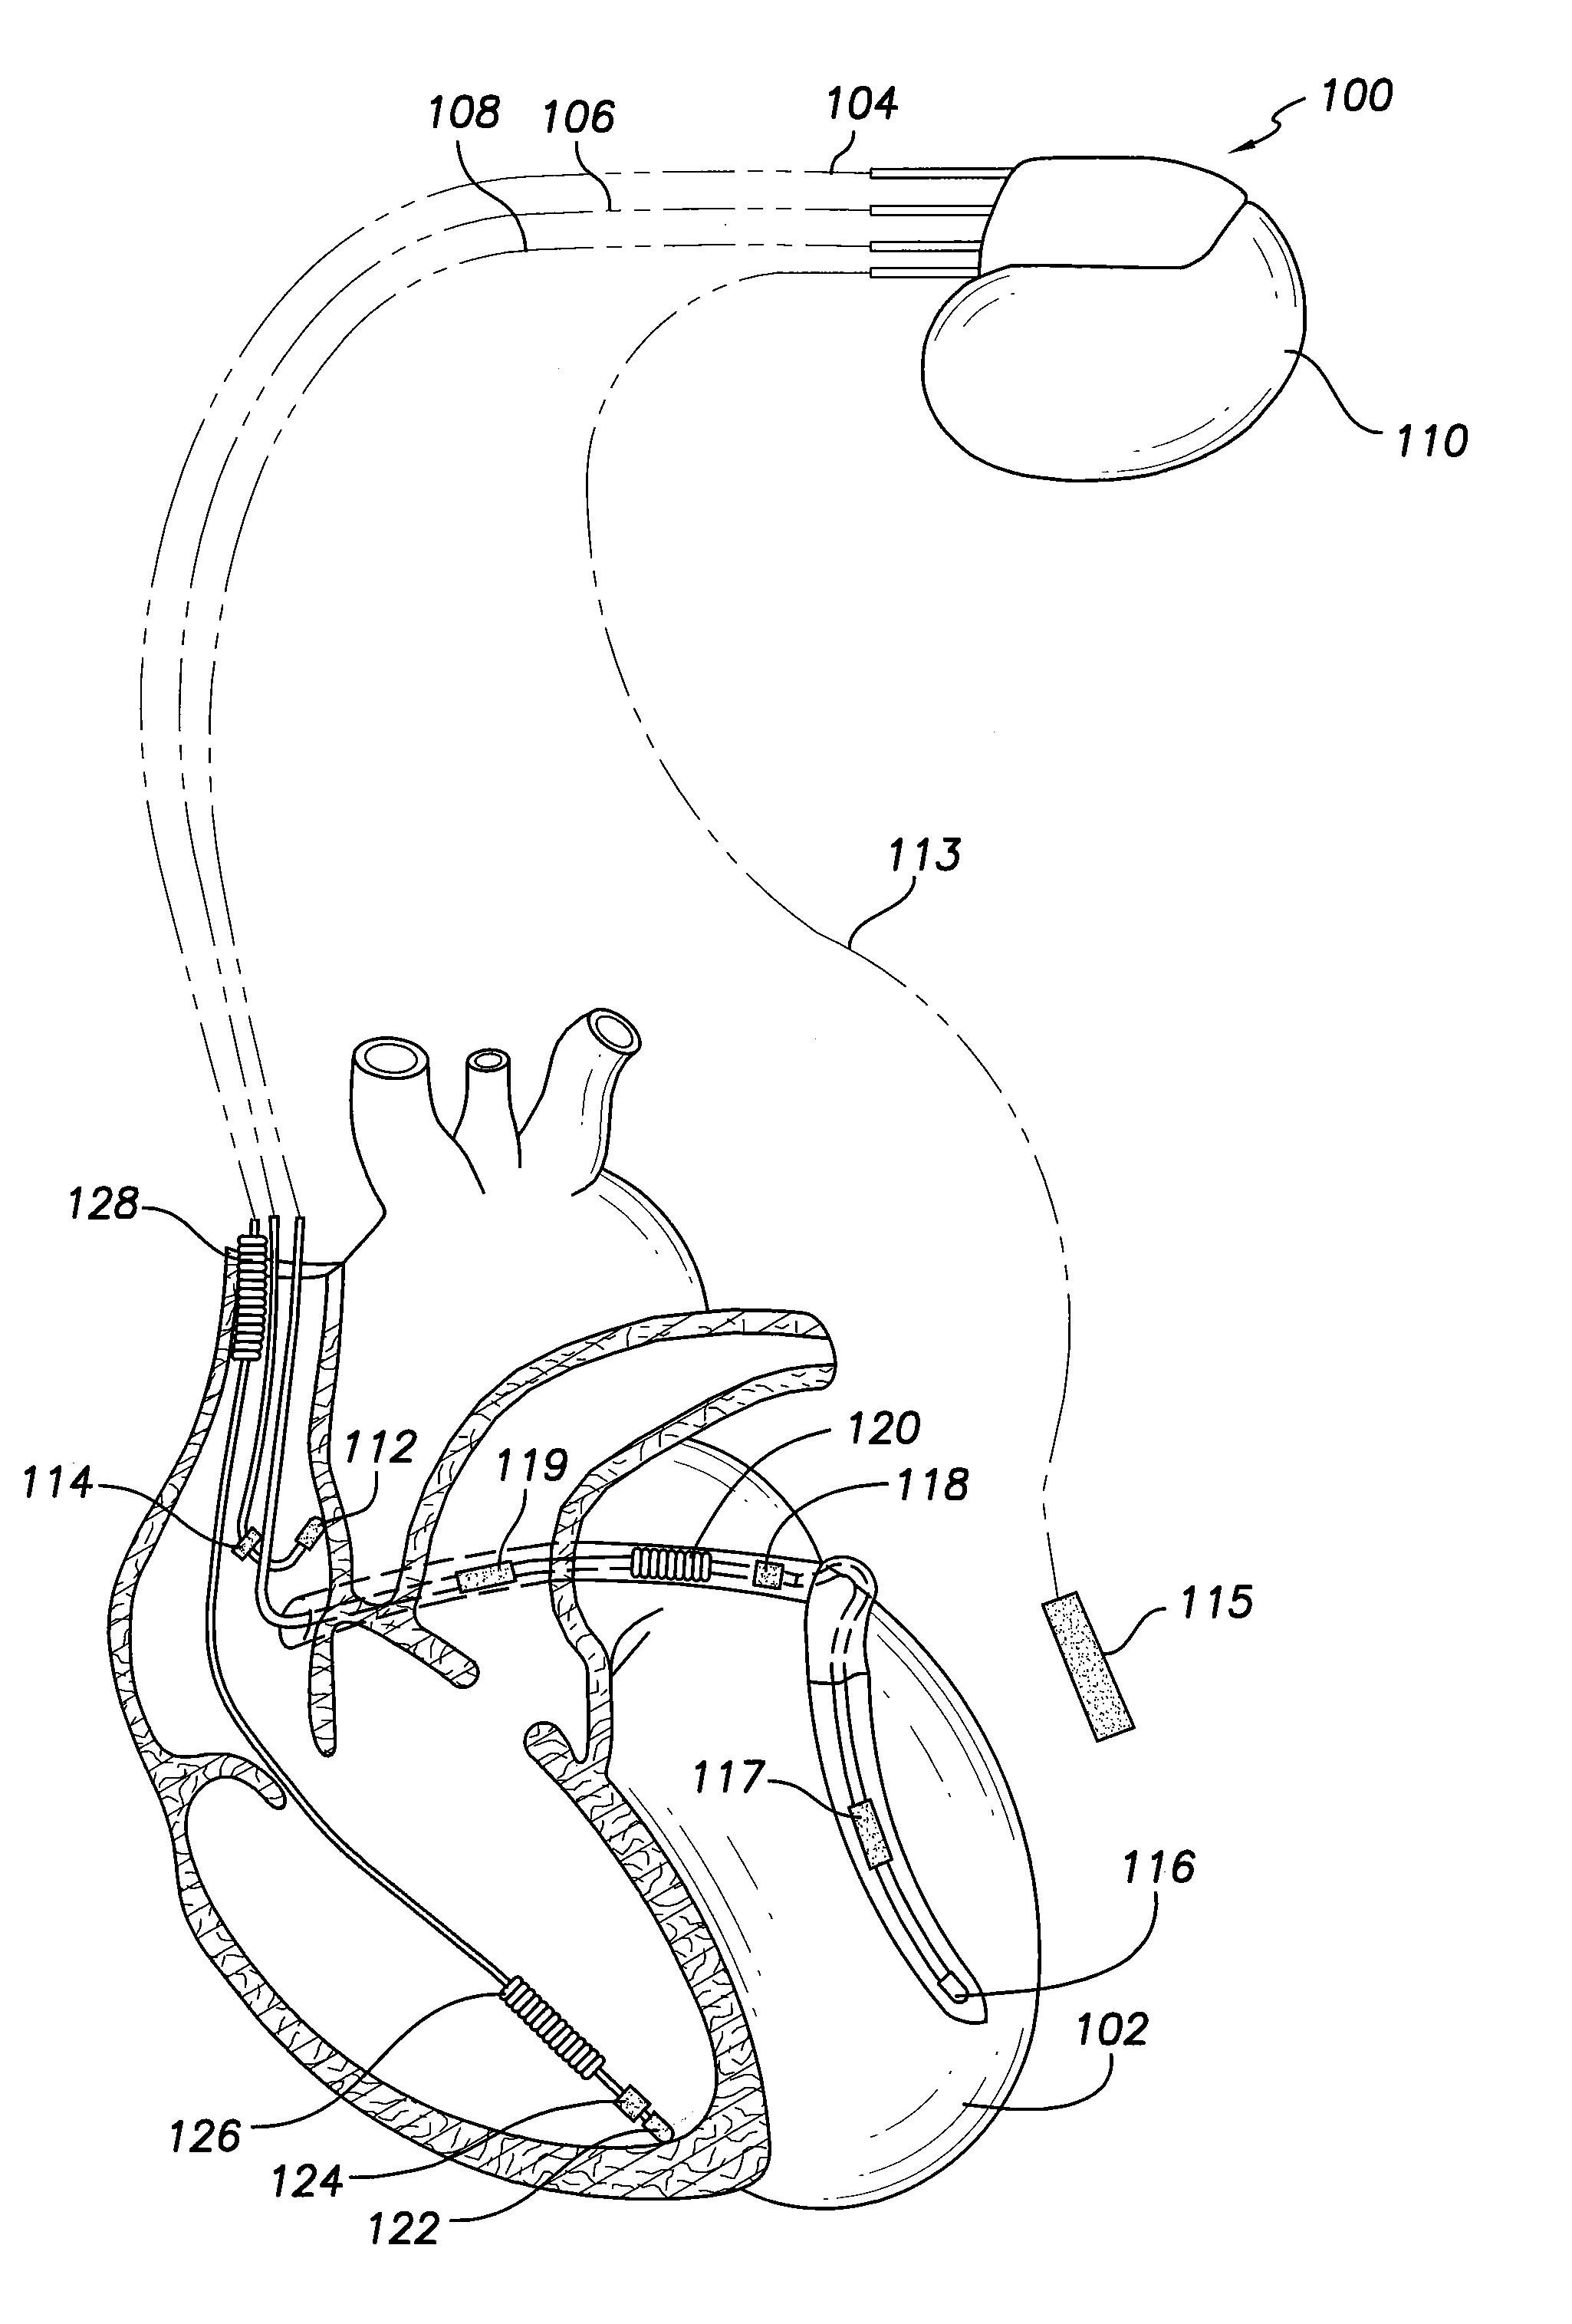 Method and system for identifying a potential lead failure in an implantable medical device